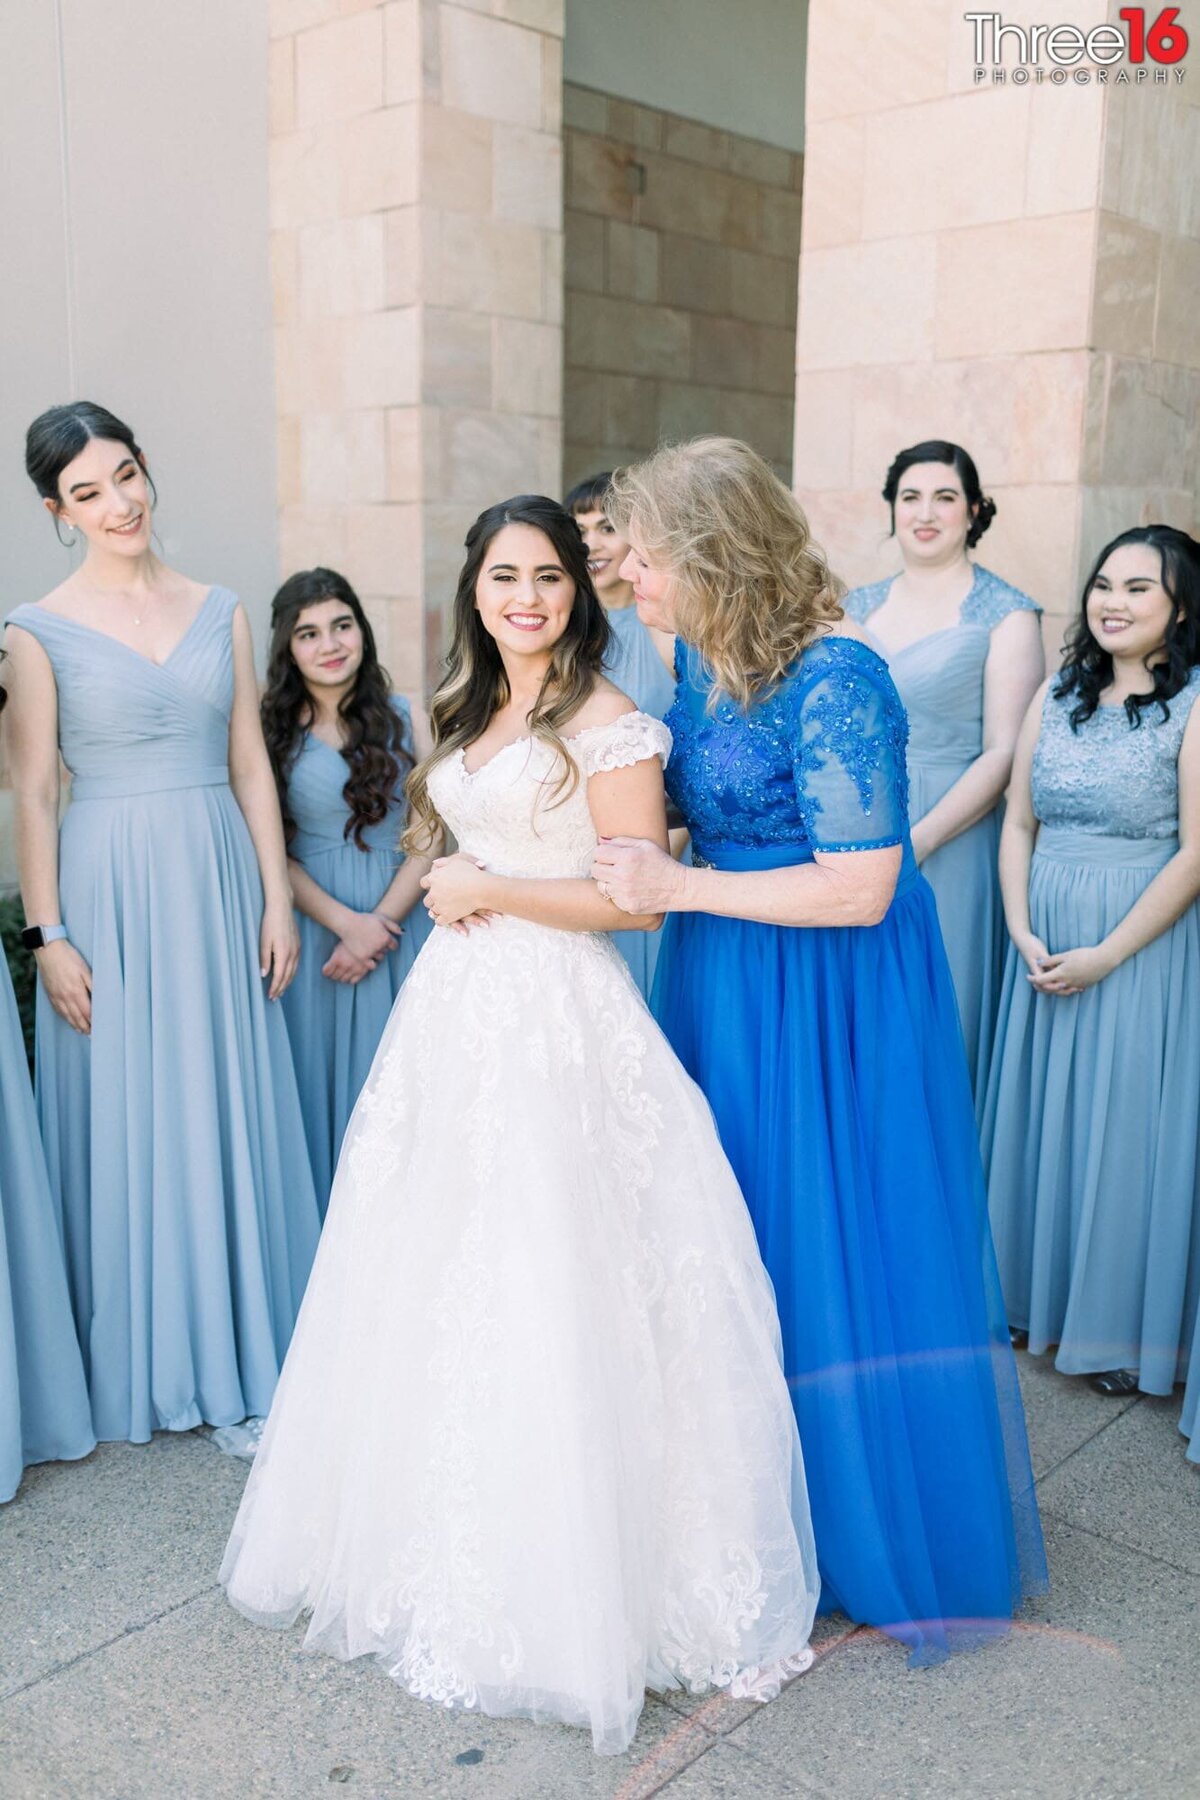 Mother of the Bride poses with her daughter as the Bridesmaids surround them